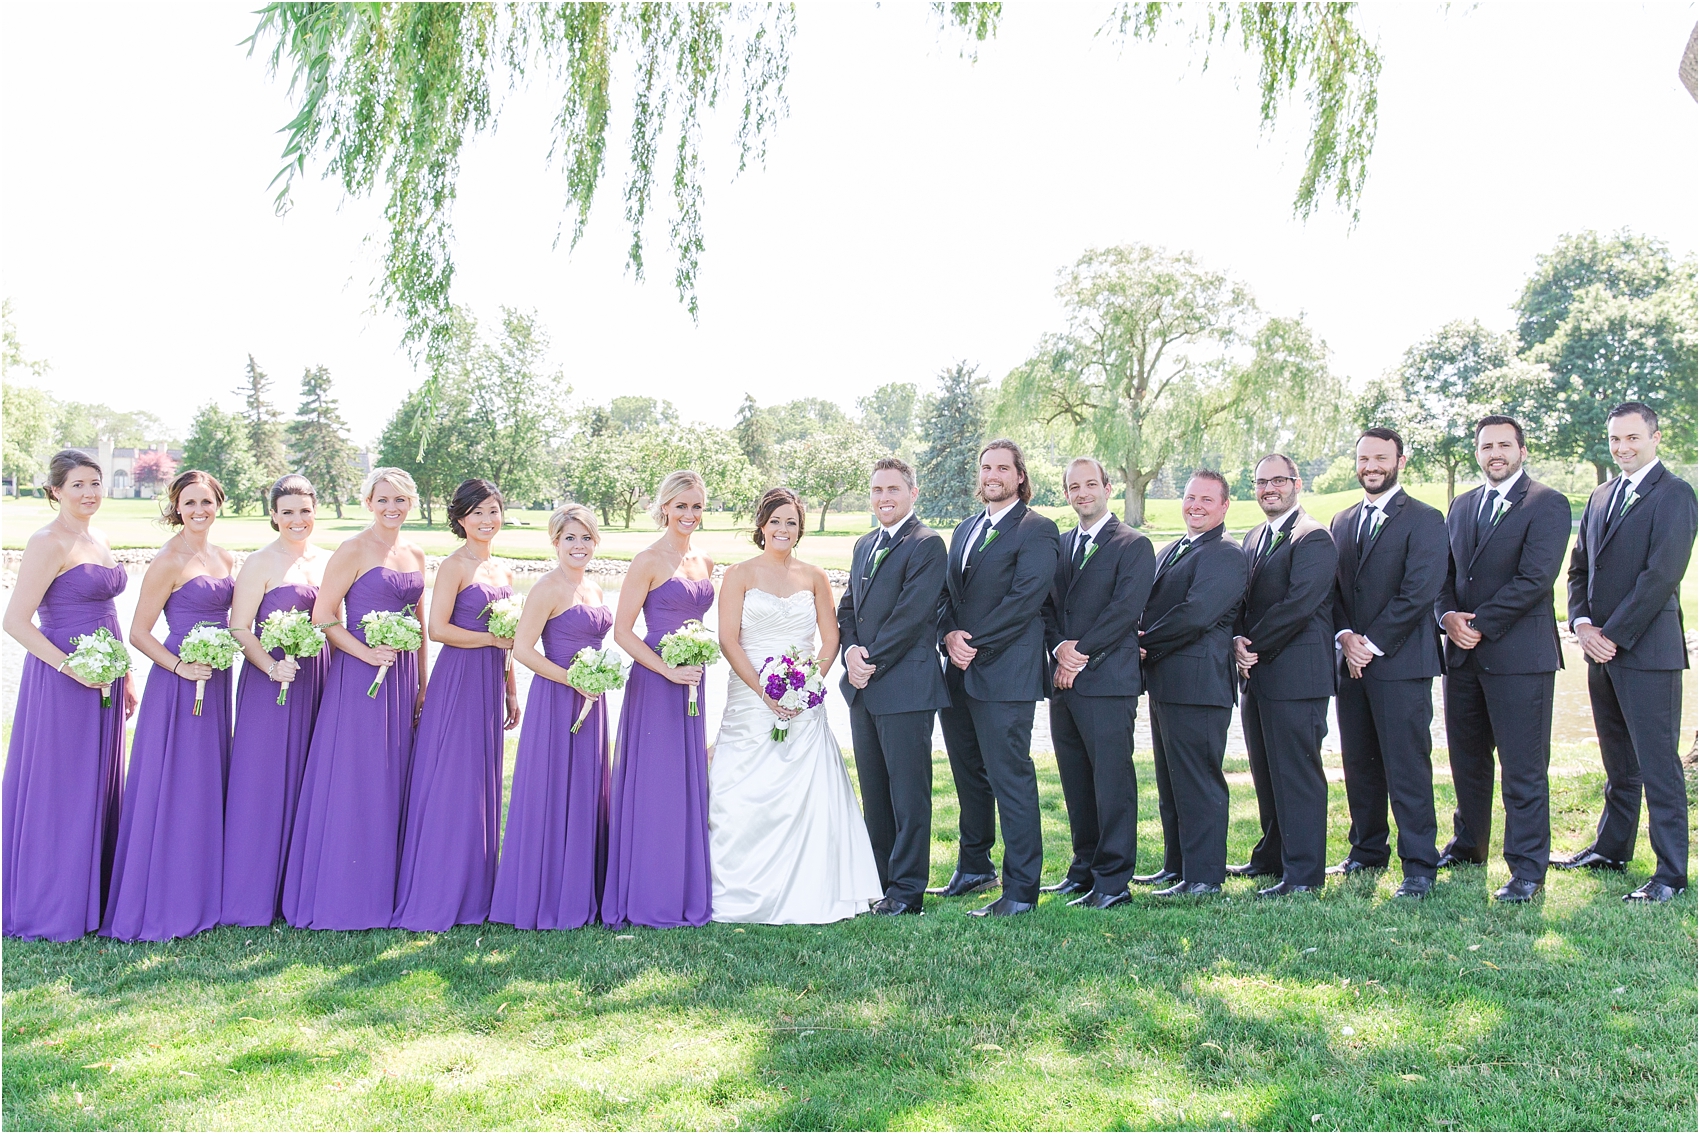 classic-wedding-photos-at-great-oaks-country-club-in-rochester-hills-mi-by-courtney-carolyn-photography_0033.jpg